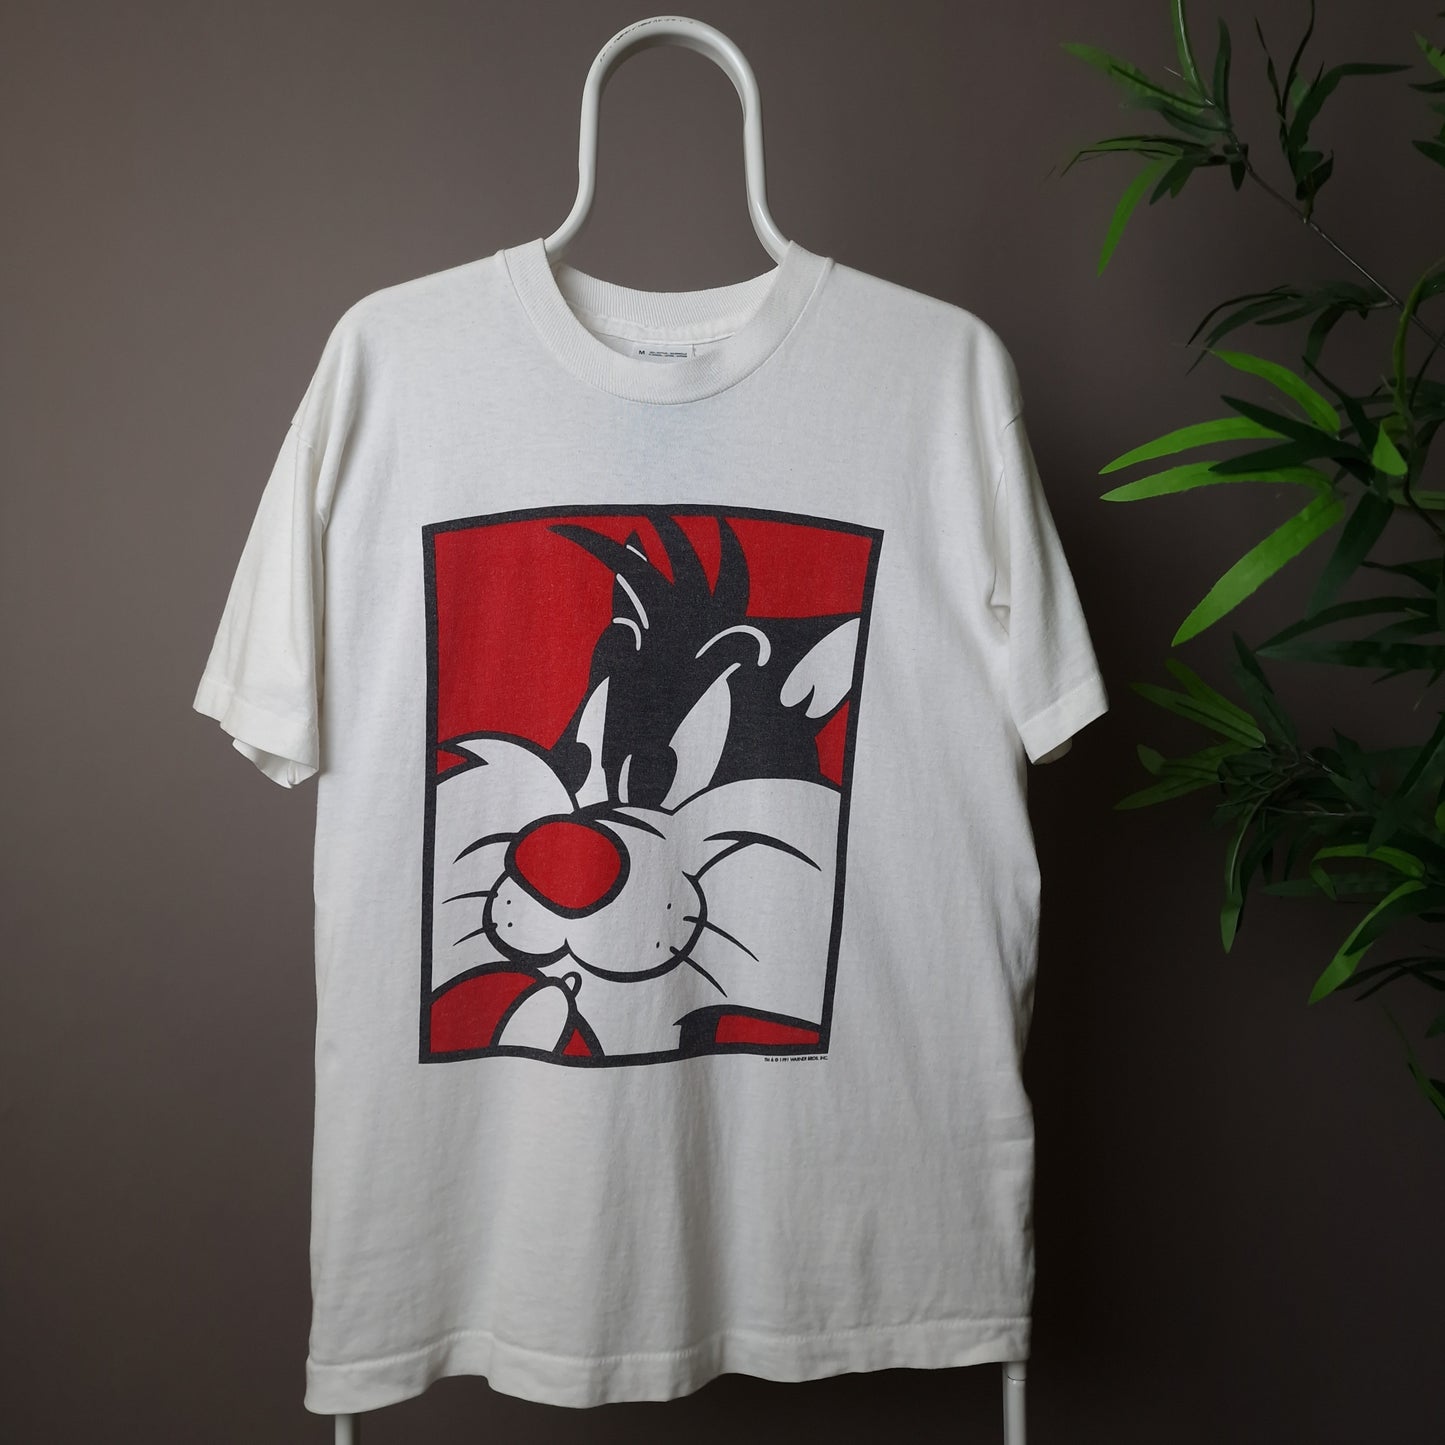 1991 Warner Bros Sylvester graphic t-shirt in white and red - medium